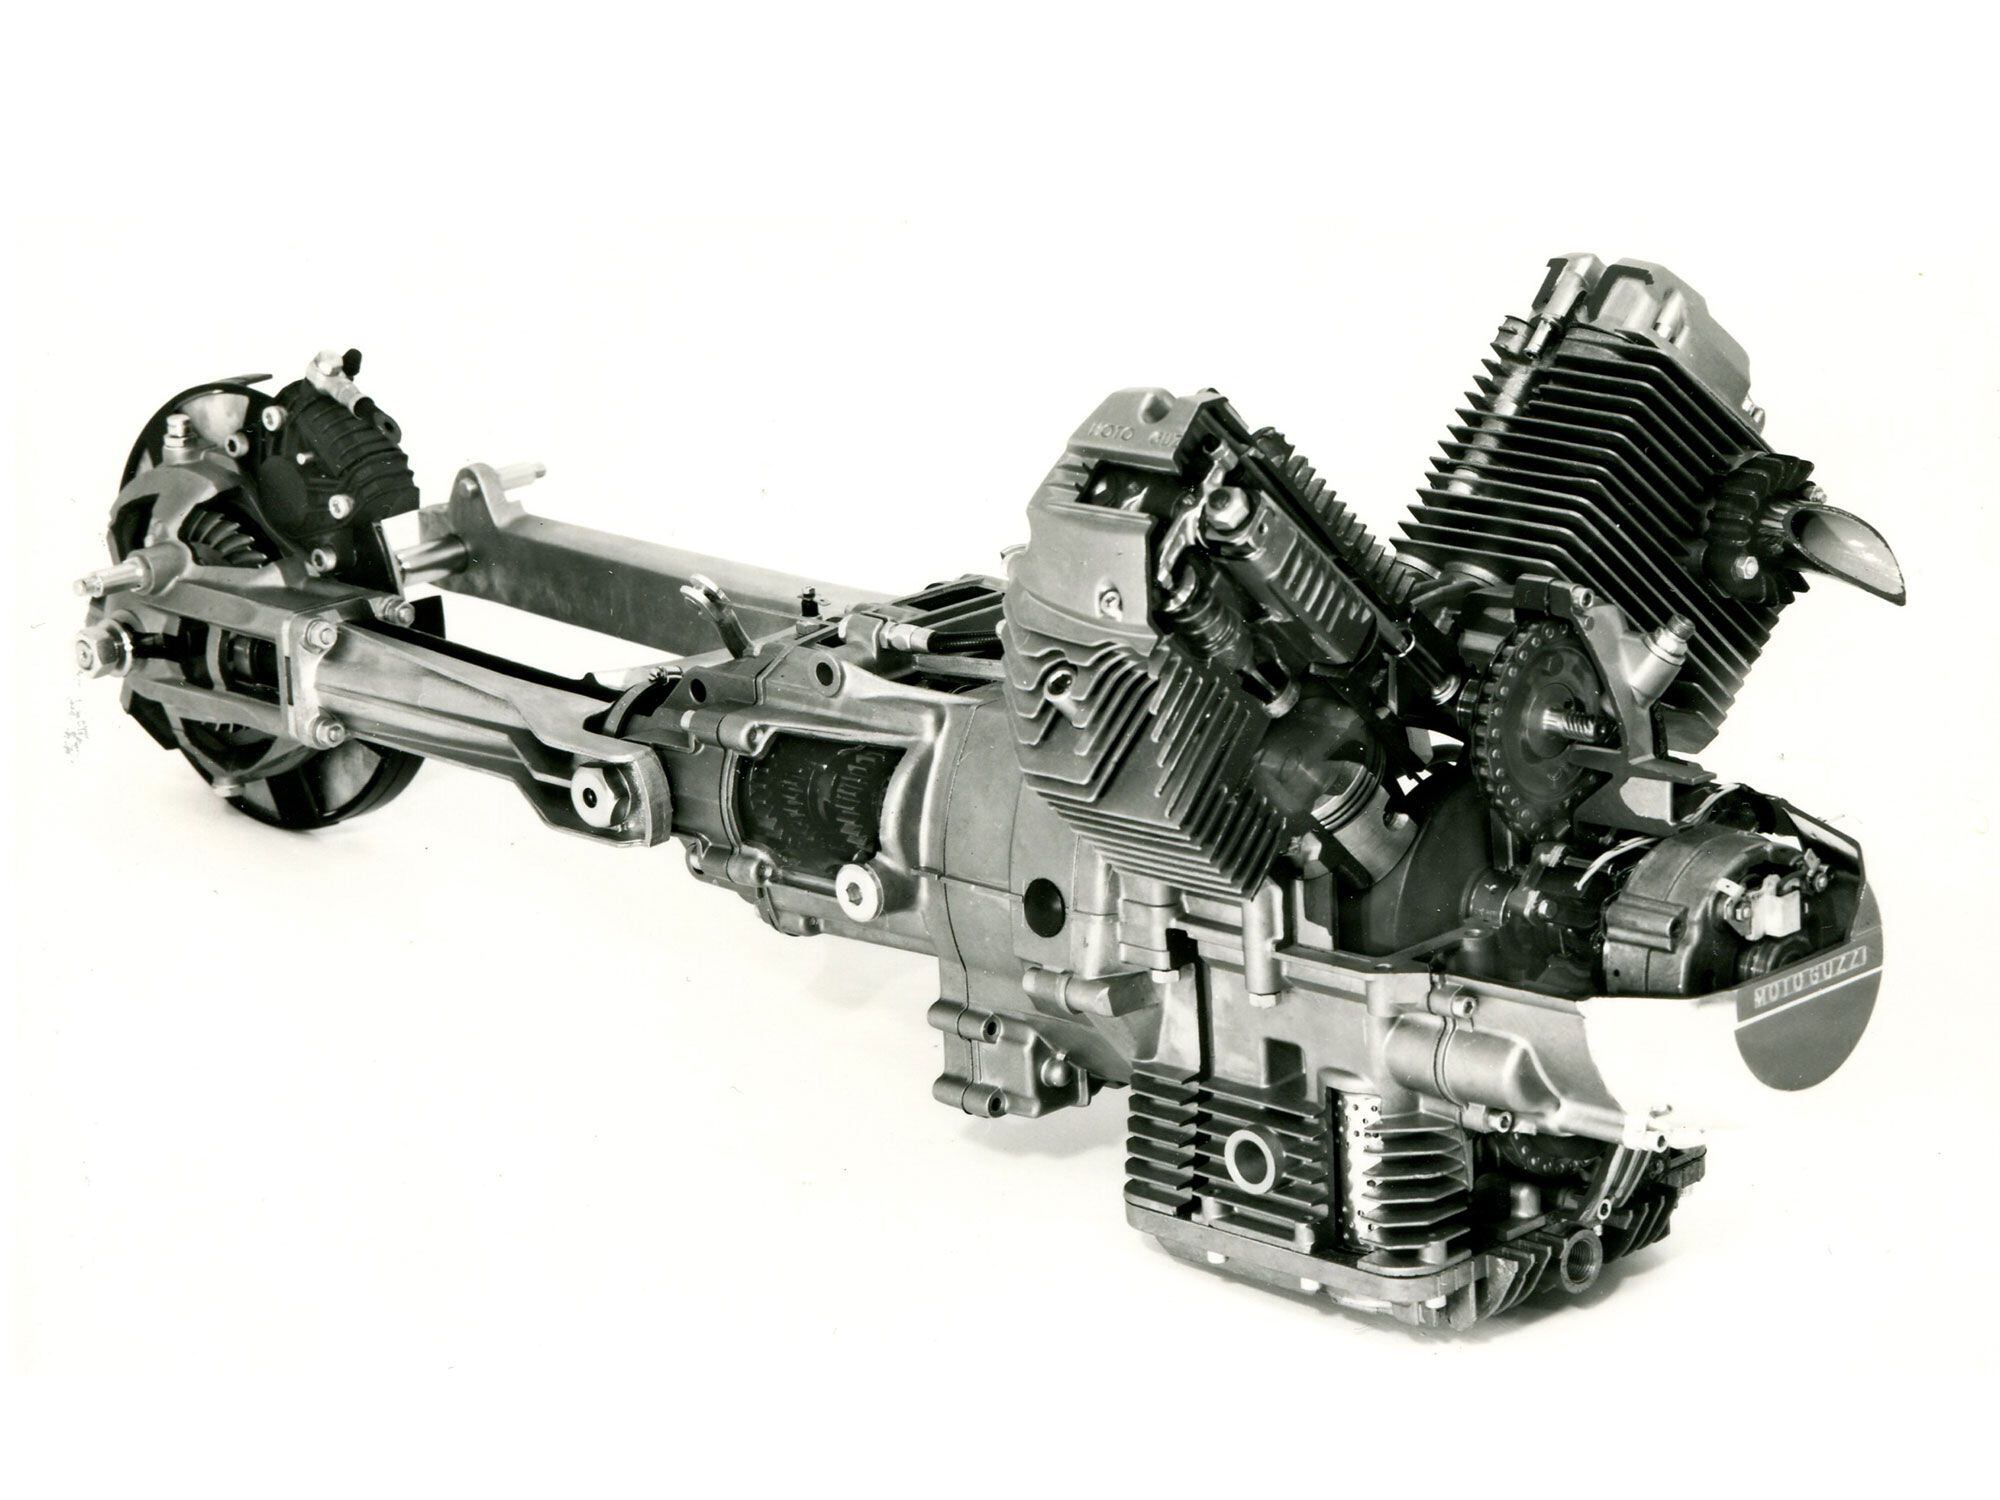 The 500cc V50 Small Block was introduced in 1977.